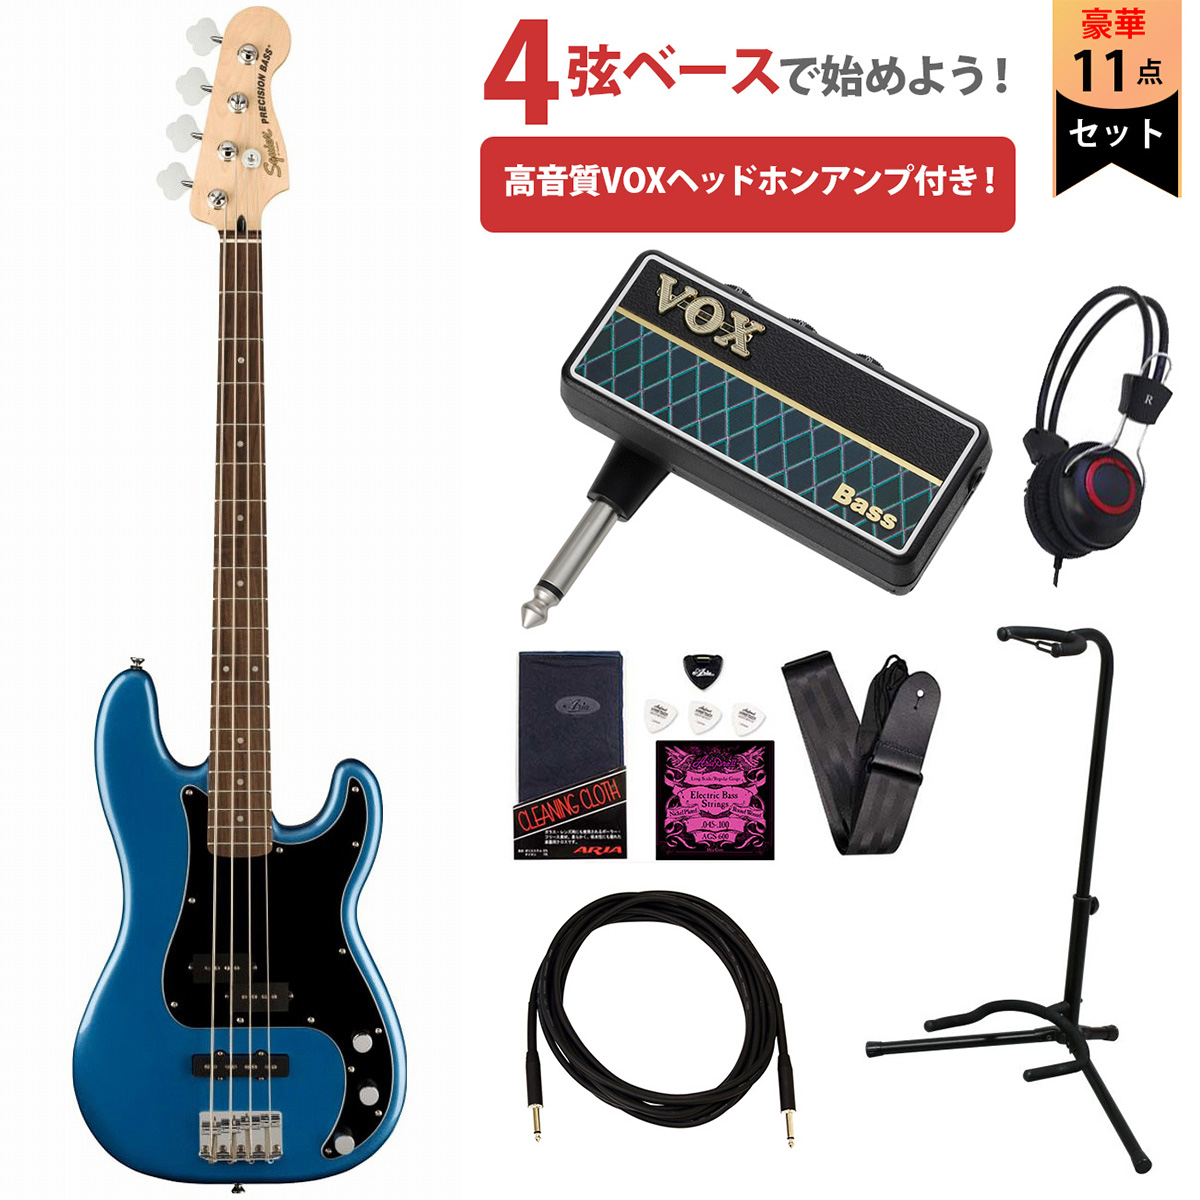 Squier by Fender / Affinity Series Precision Bass エレキベース初心者セット